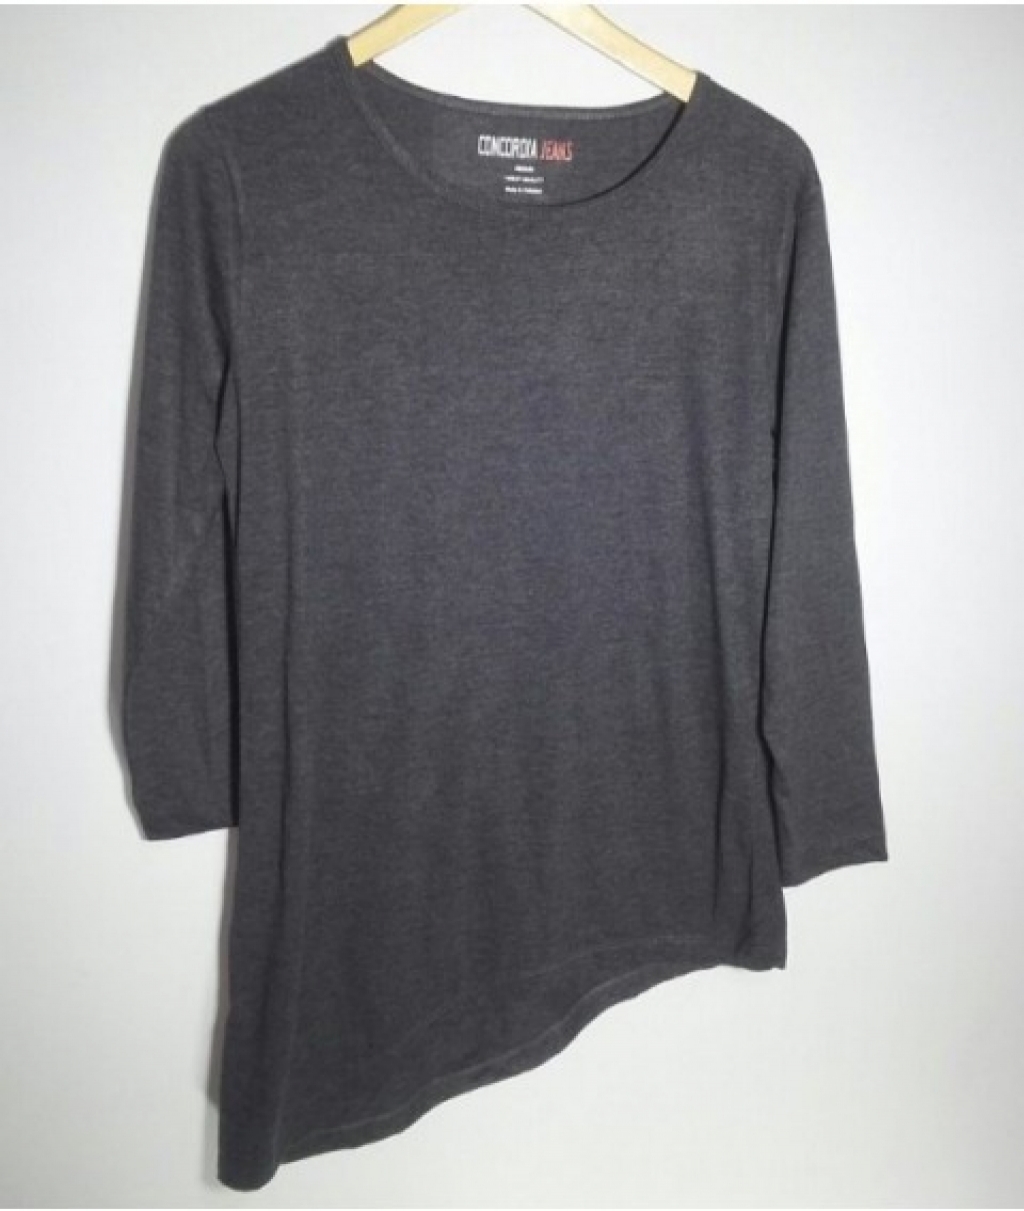 15088446880_Affordable_WOMENS_SIDE_CUT_TEE_(CHARCOAL_COLOR).jpg